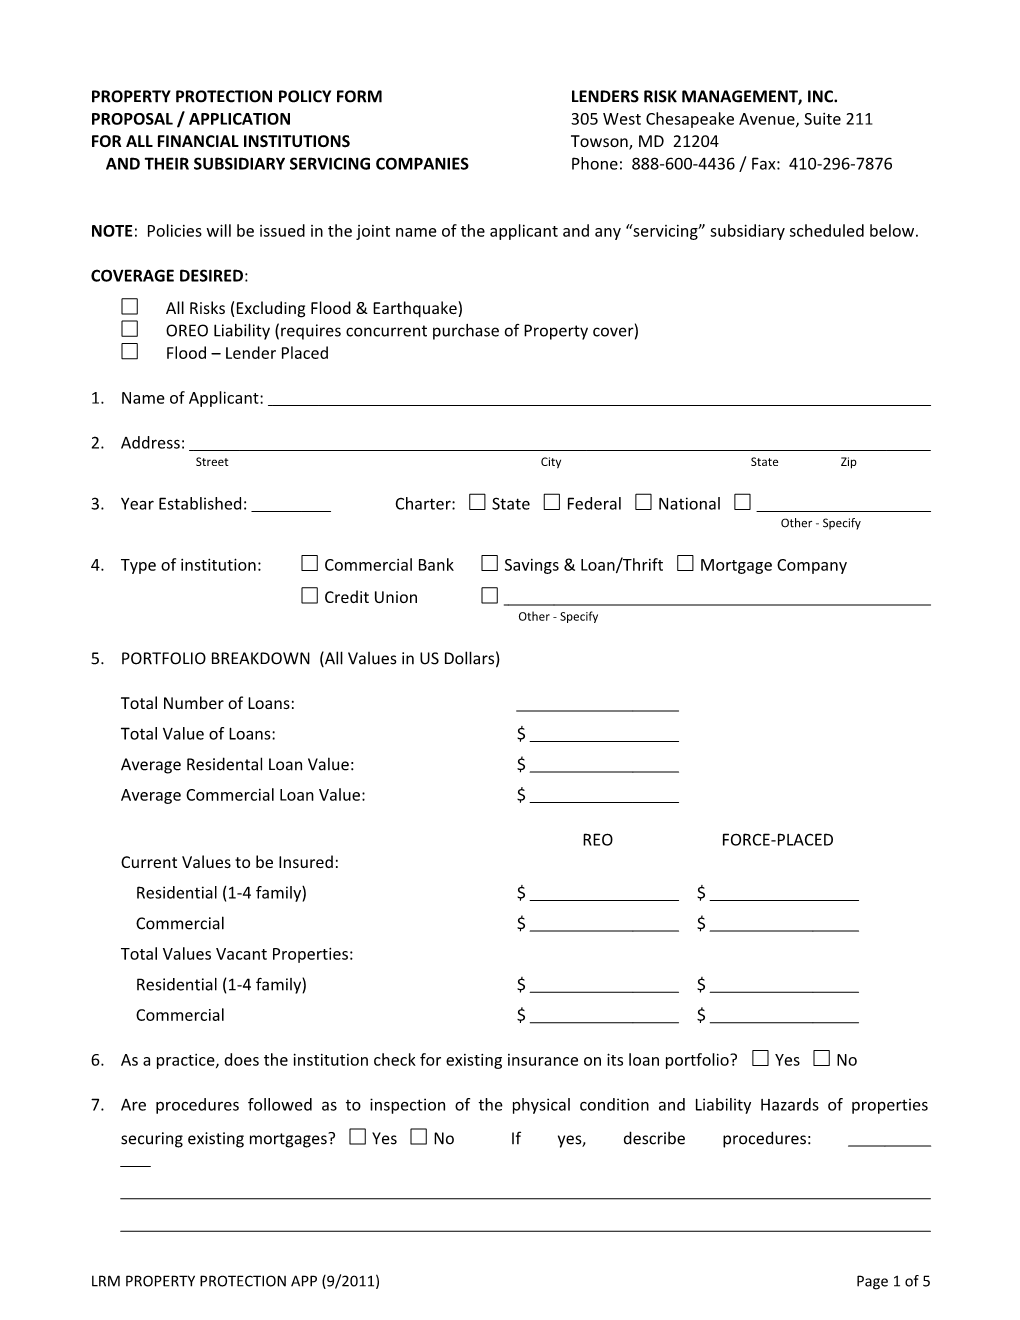 Proposal Form for Property Protection Policy Form